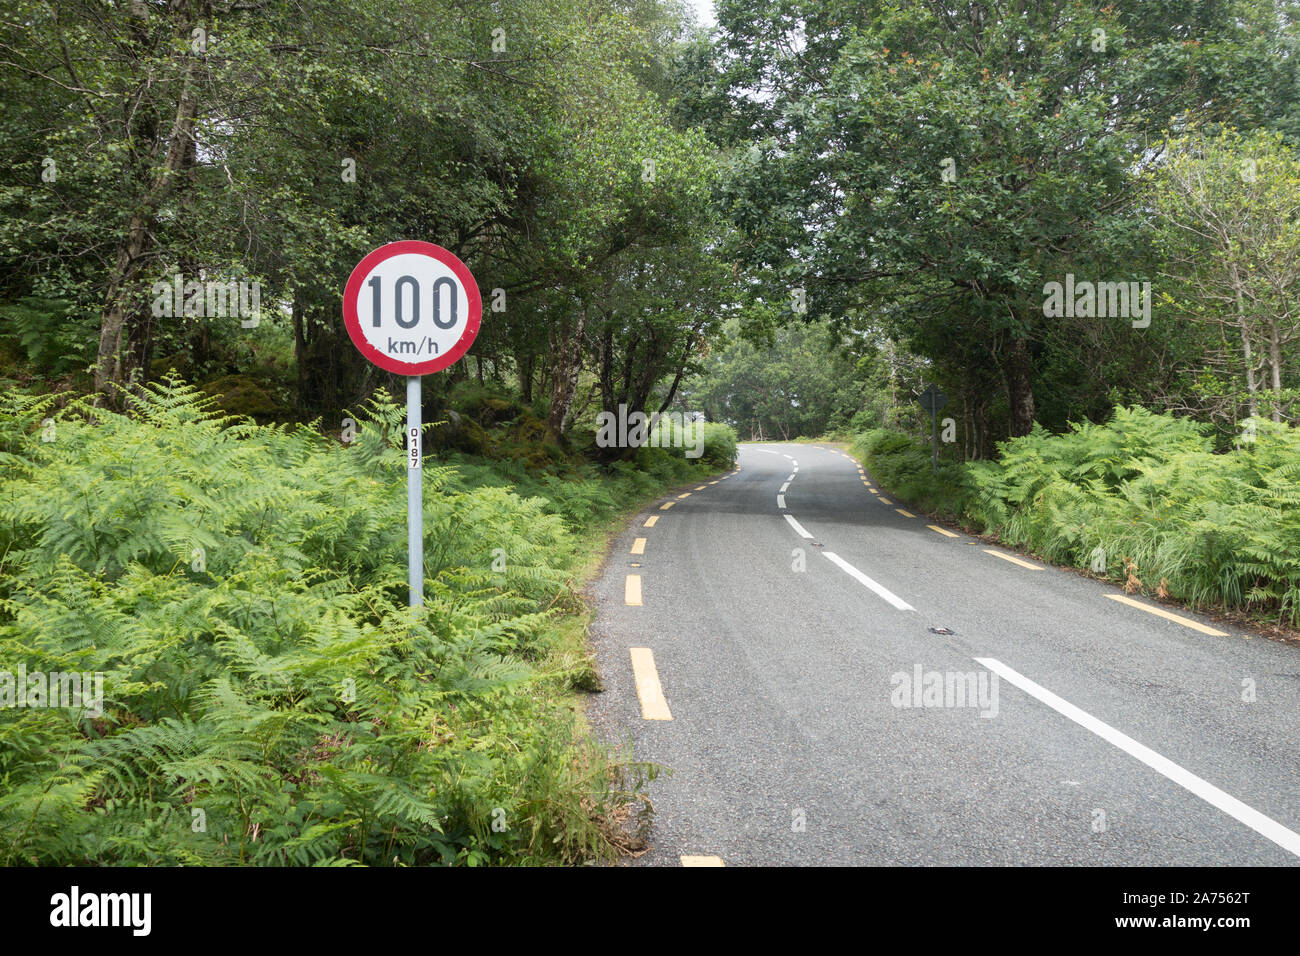 100km and hour speed limit on an irish country road green lane with a dangerous bend Stock Photo